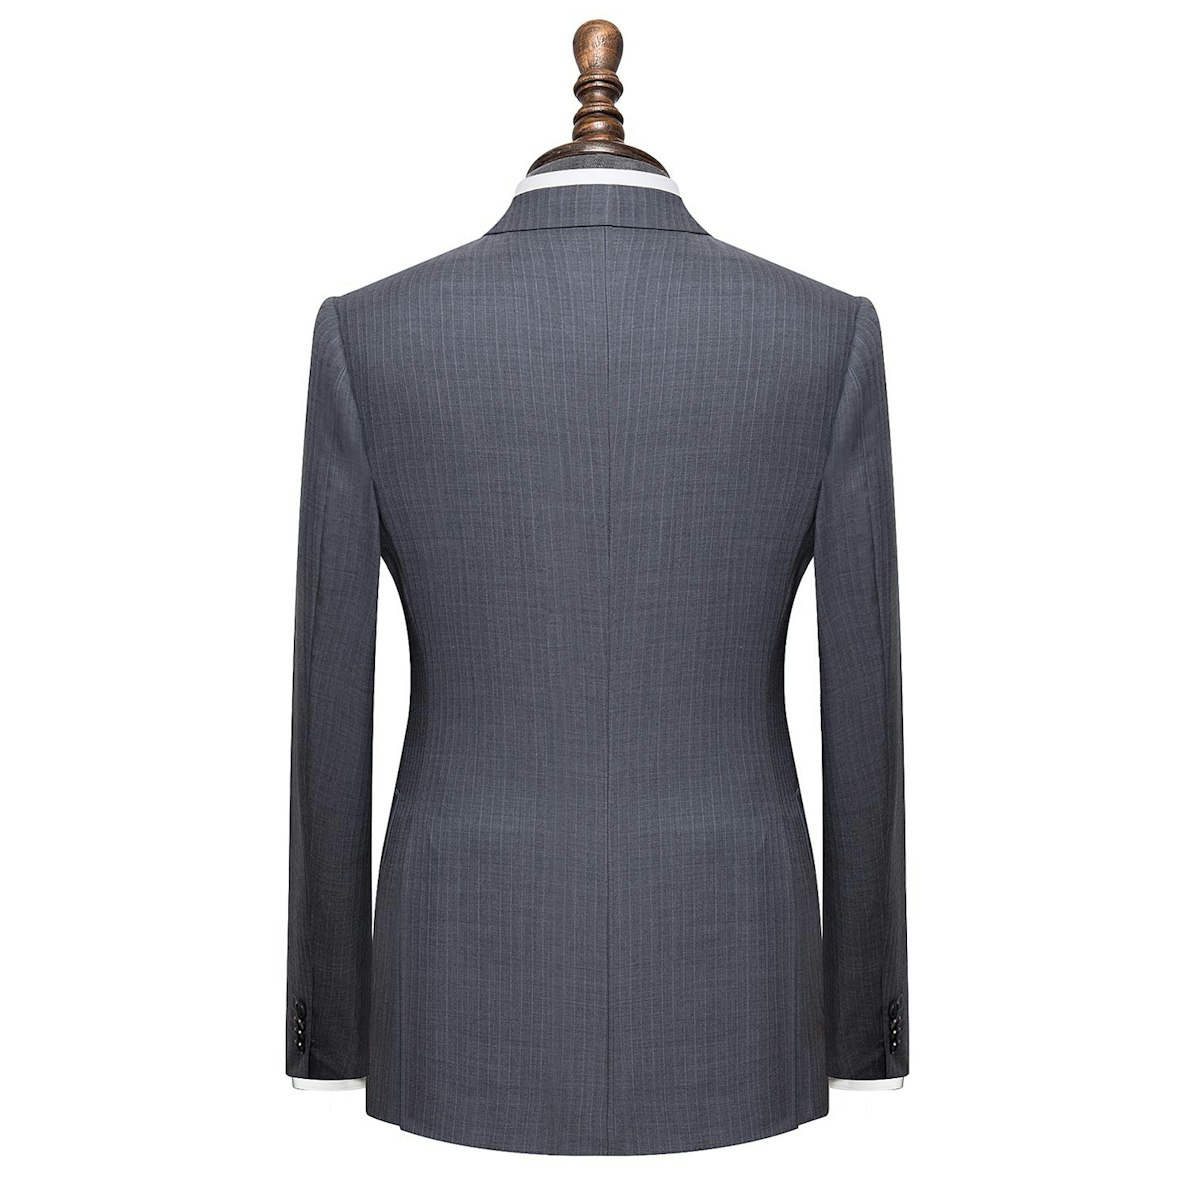 InStitchu Collection The Chesterfield mens suit